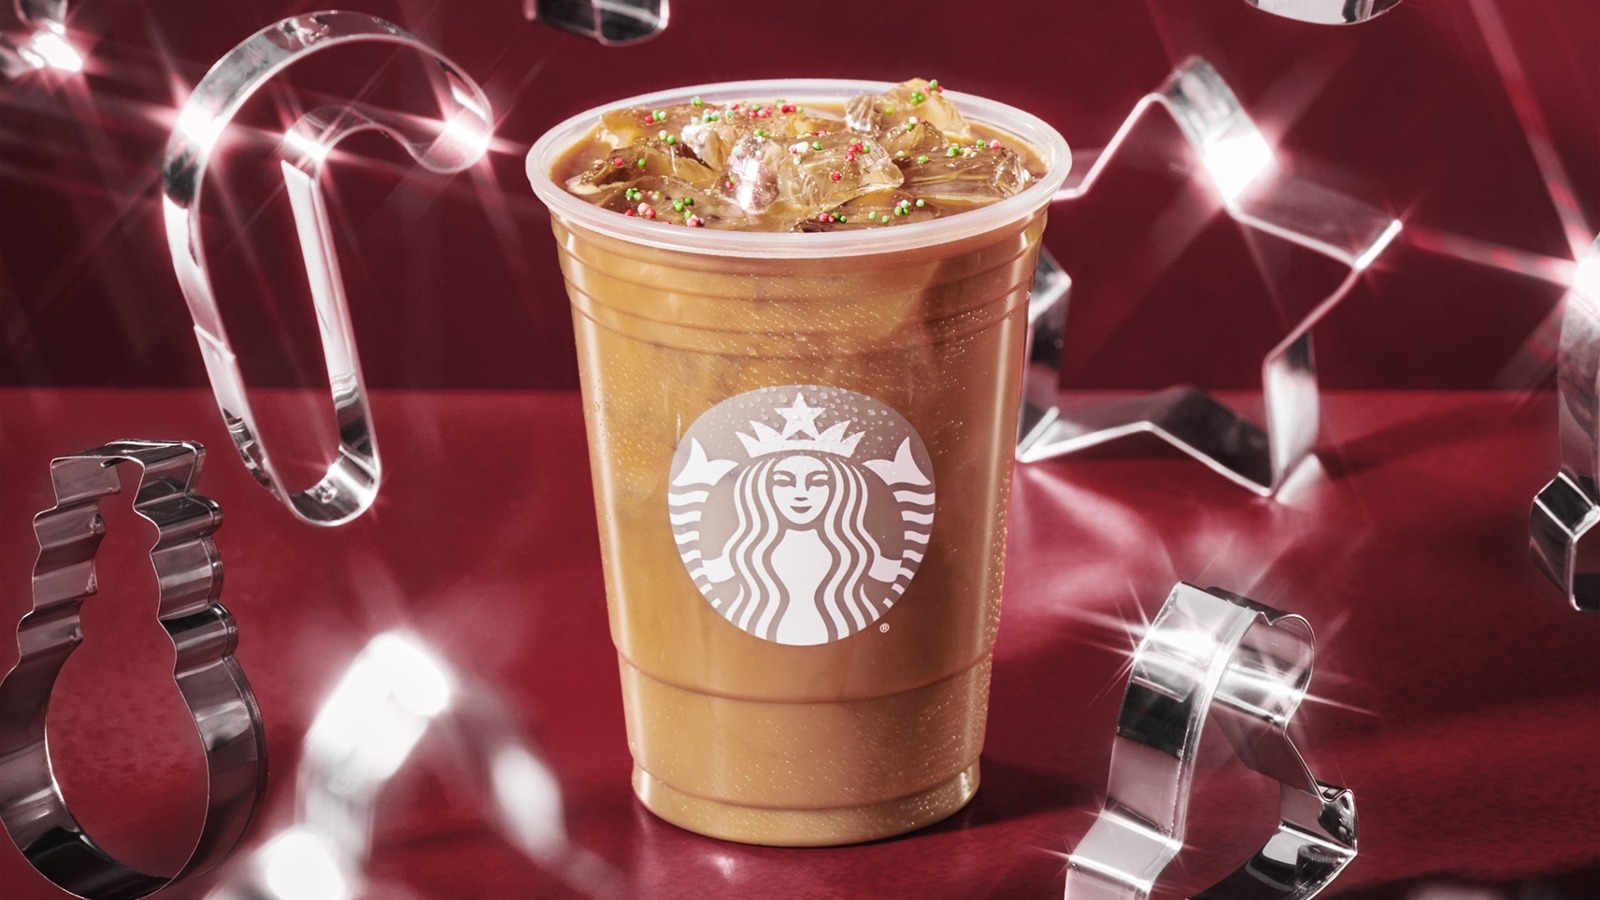 https://www.mashed.com/img/gallery/the-2022-starbucks-holiday-cup-lineup-is-finally-here/l-intro-1666130454.jpg